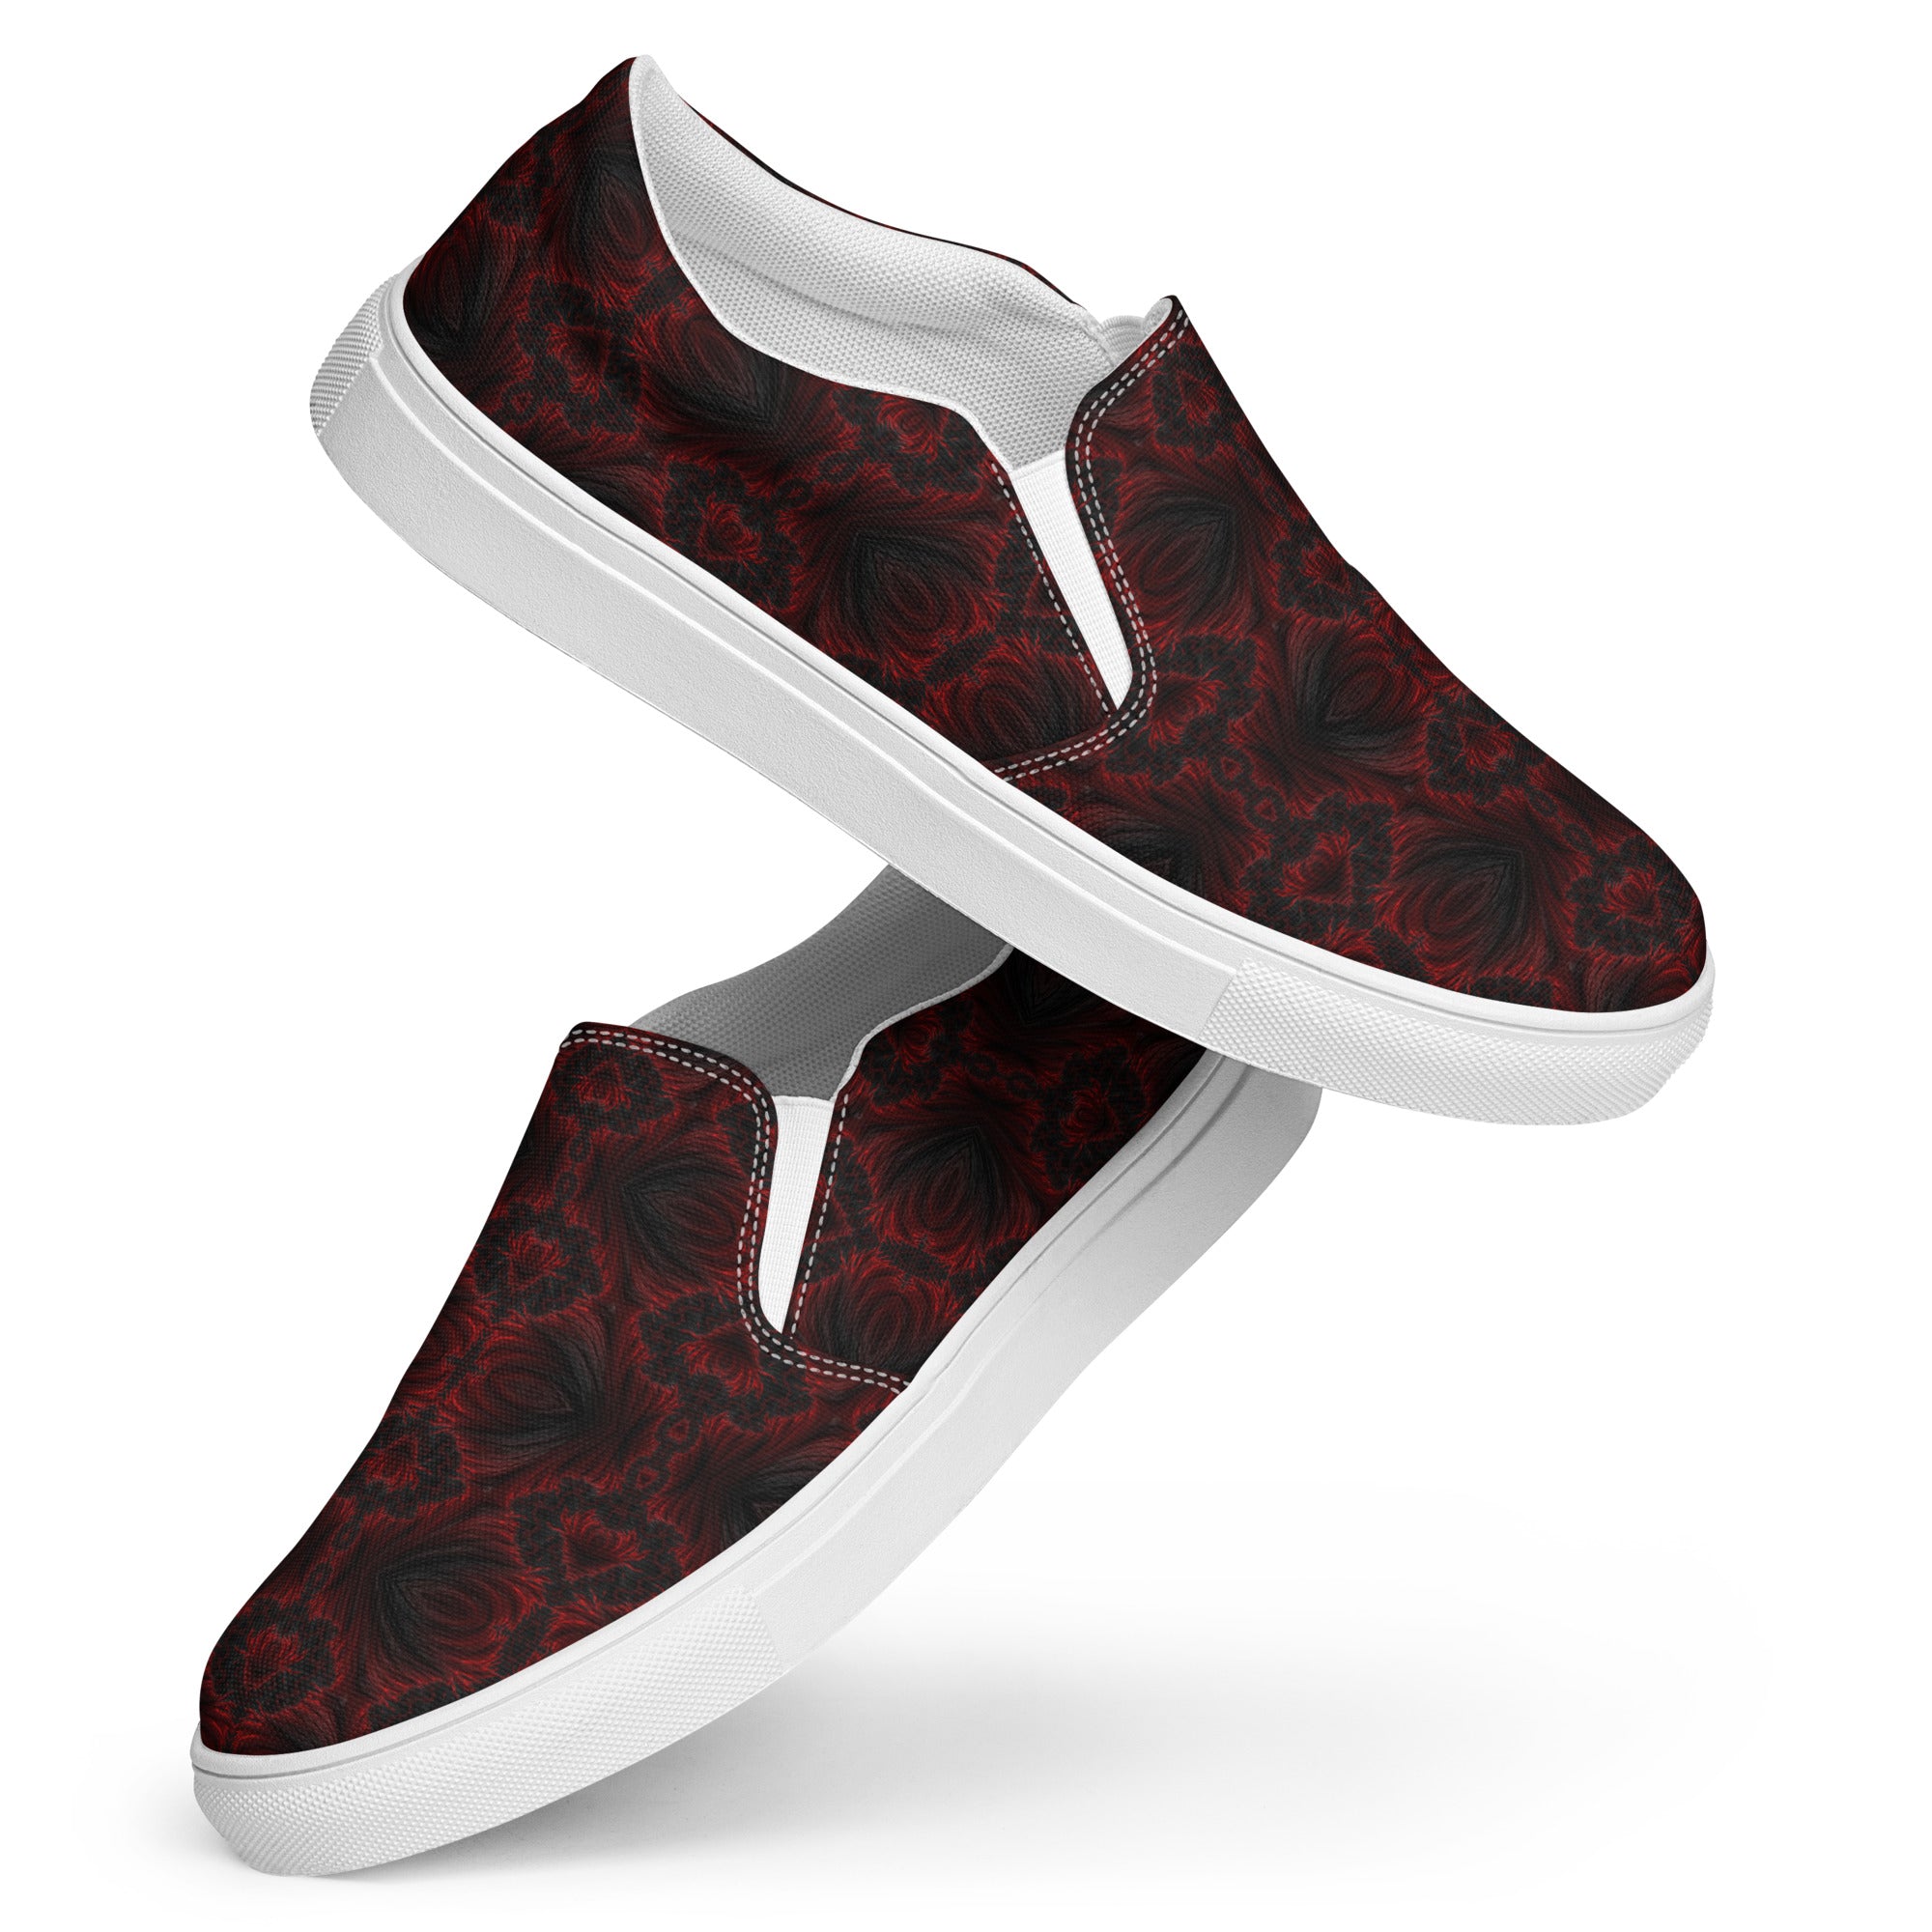 Dark Red Dreams Women’s slip-on canvas shoes